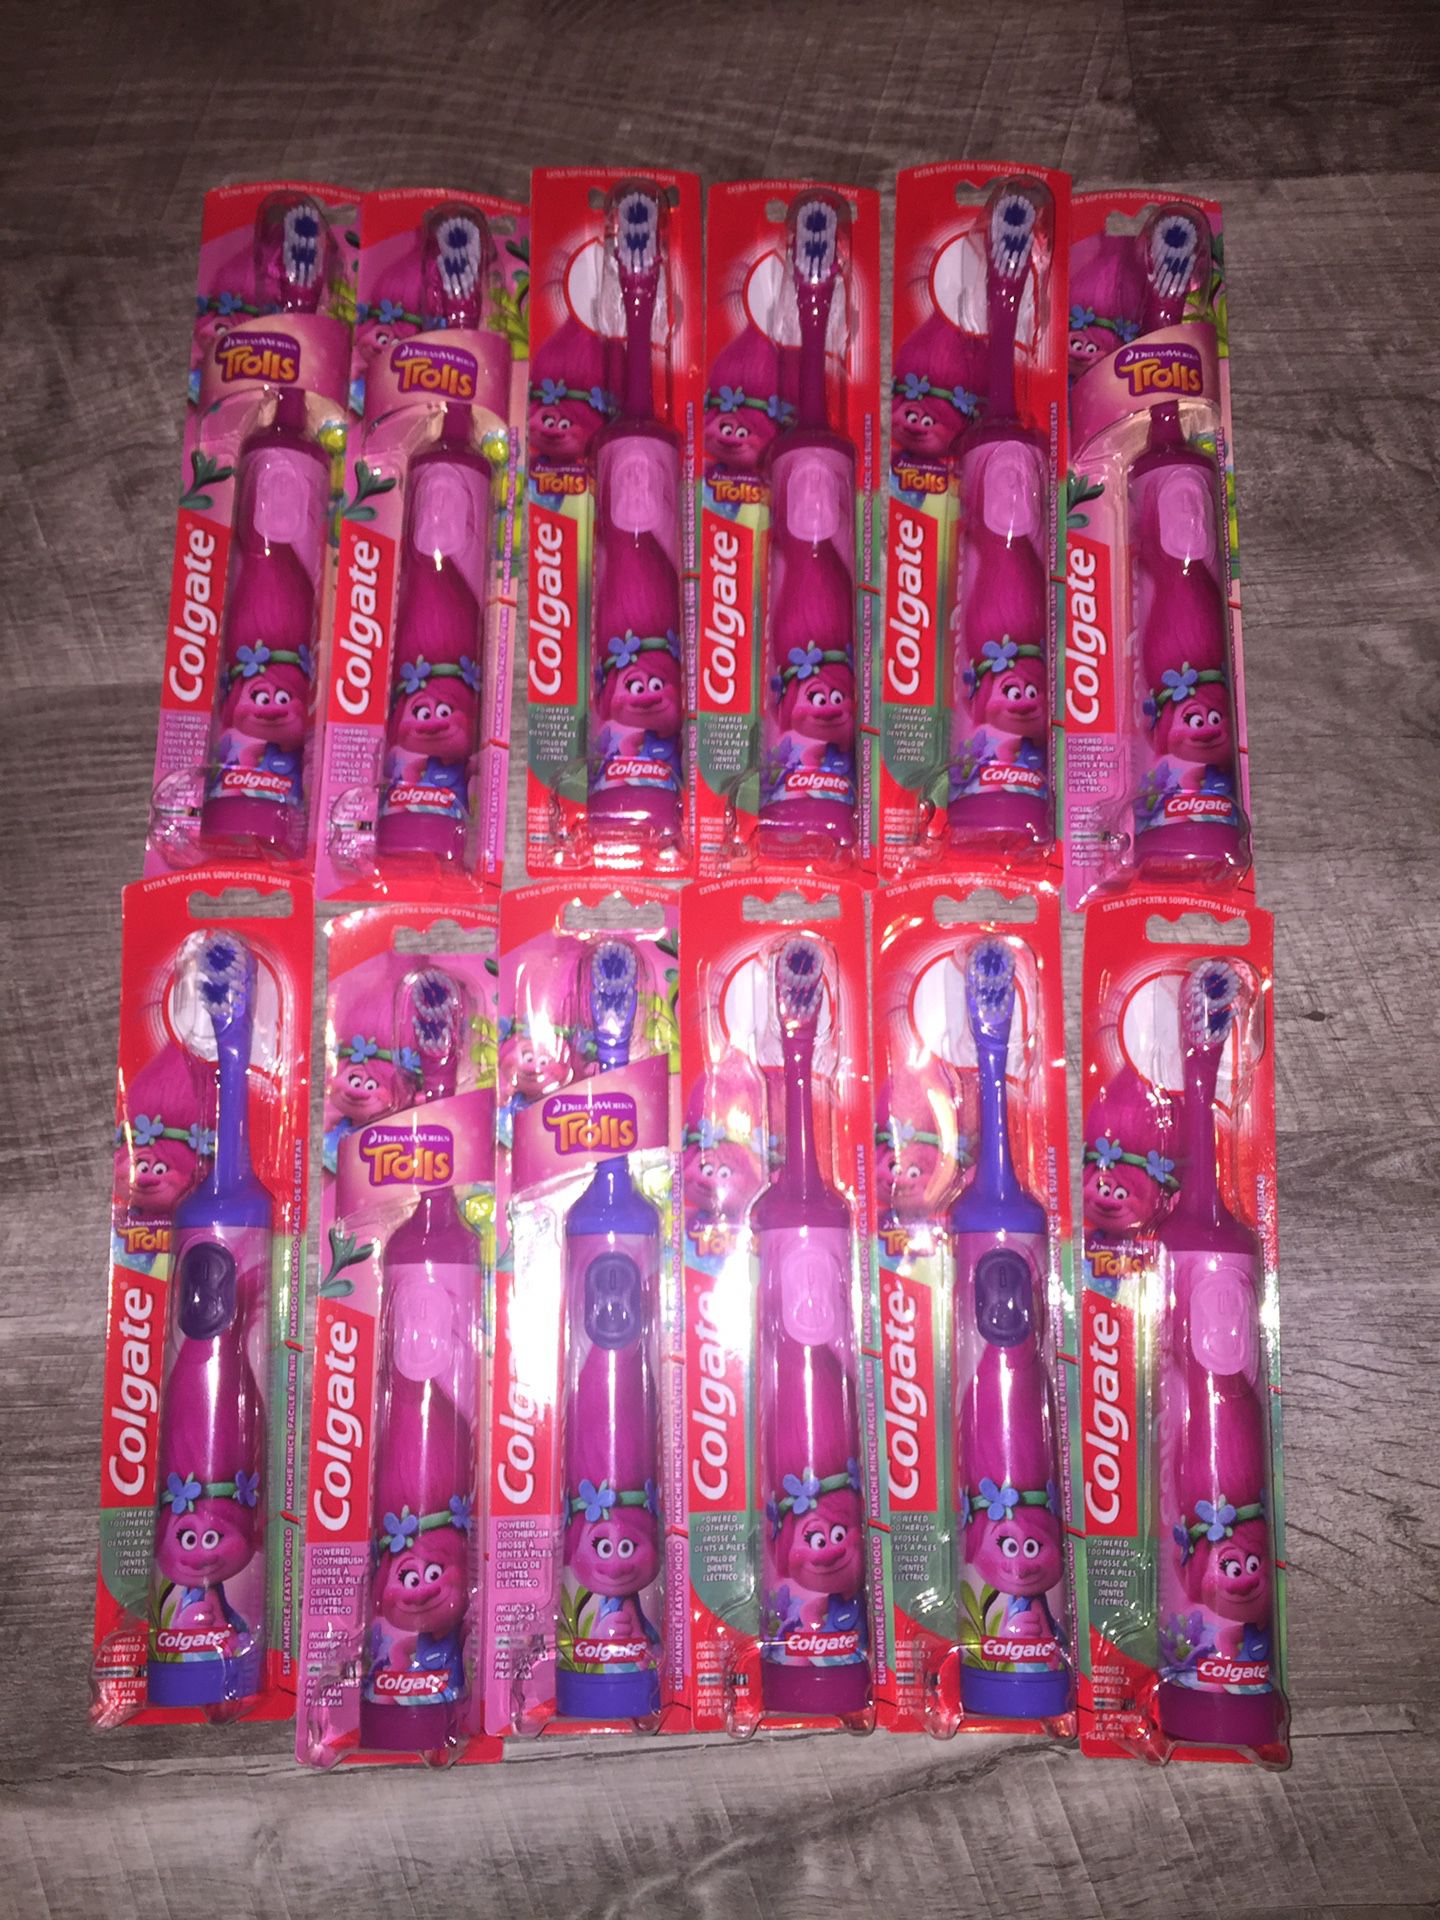 Powered toothbrush for kids trolls collection $3.50 each